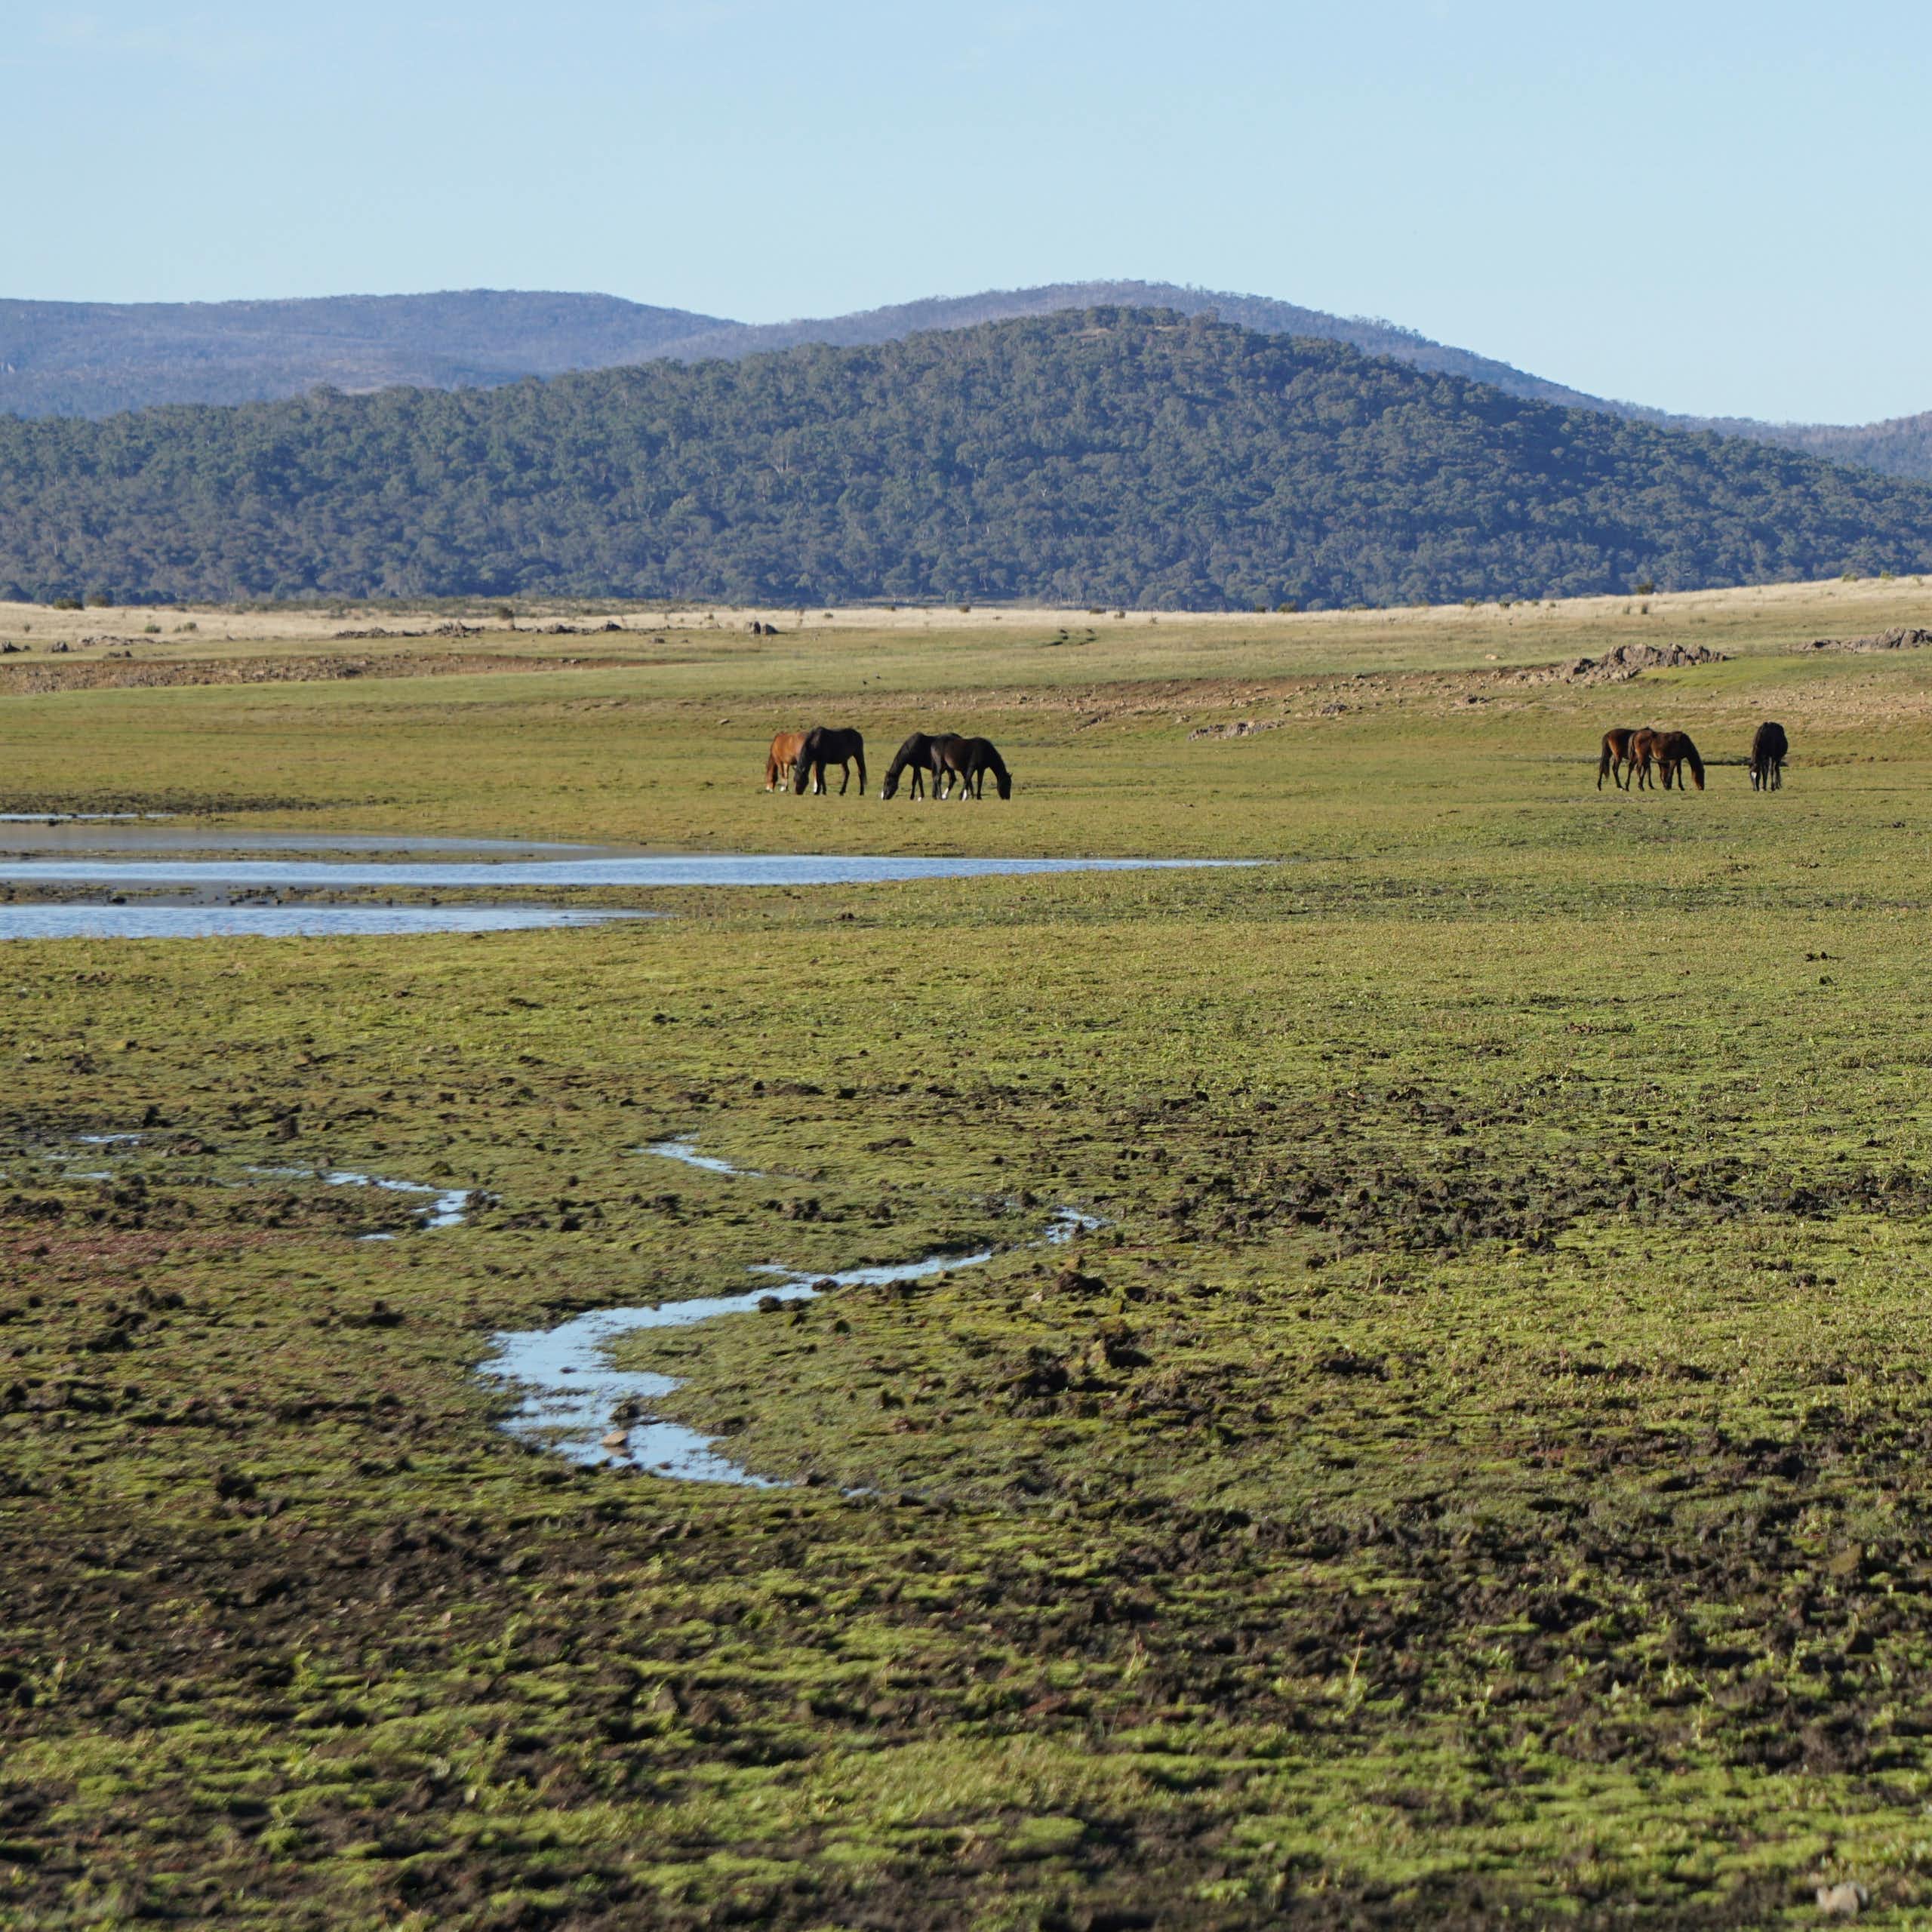 A herd of Brumbies thWild horses (brumbies) grazing in Kosciuszko National Park, showing trampled peatlands in the foreground